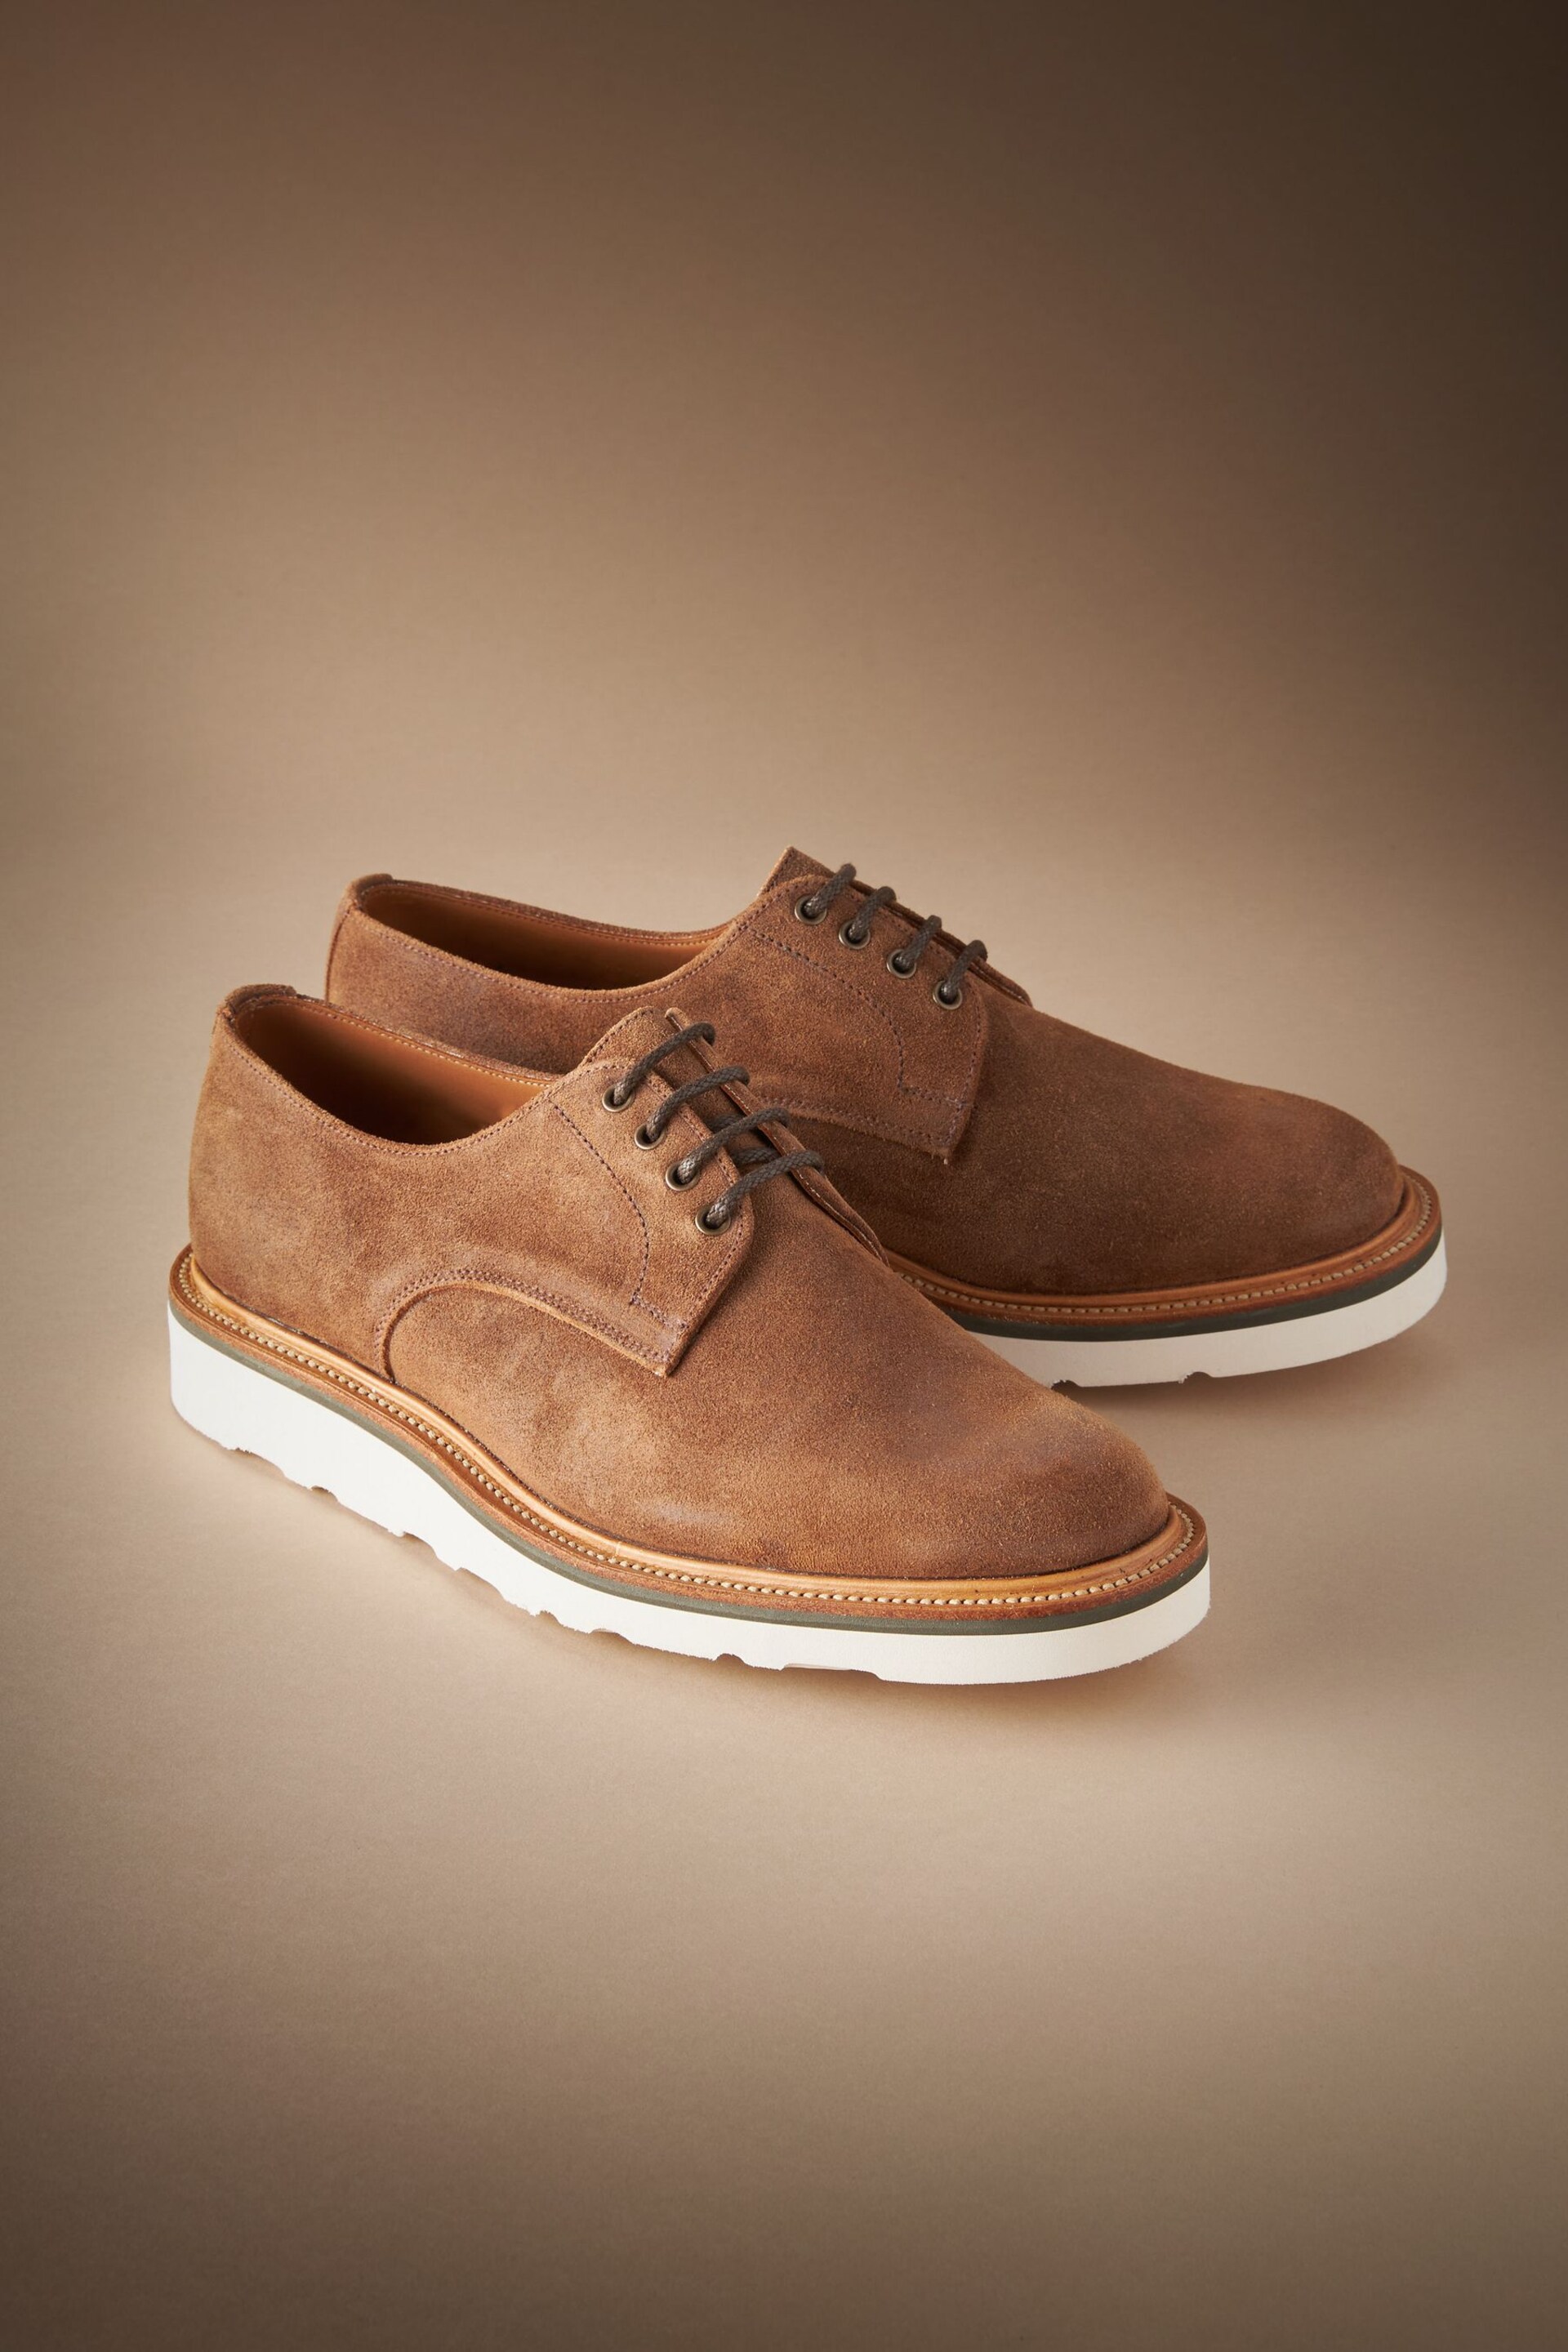 Tan Brown Suede Sanders for Next Wedge Derby Shoes - Image 1 of 7